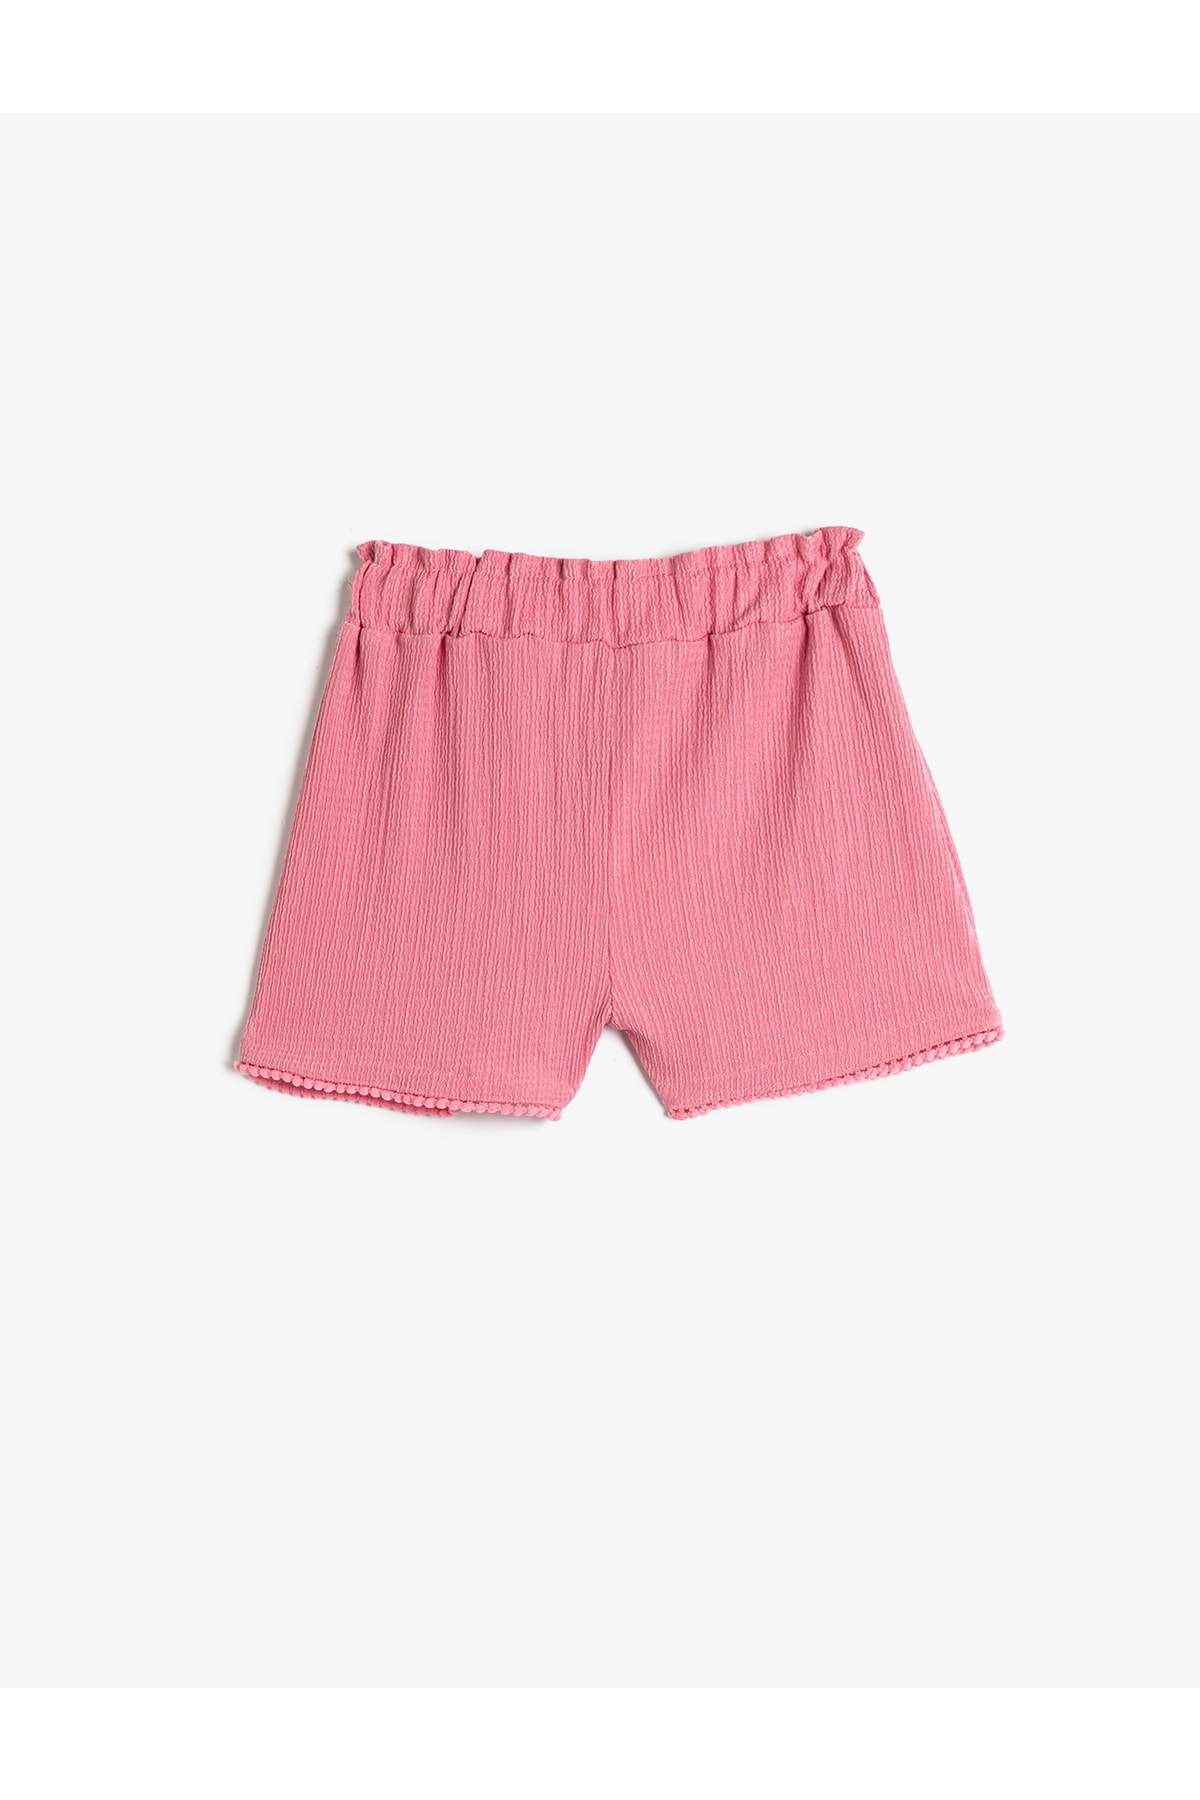 Koton The Waist of the Shorts is Elastic, Pleated, Textured.